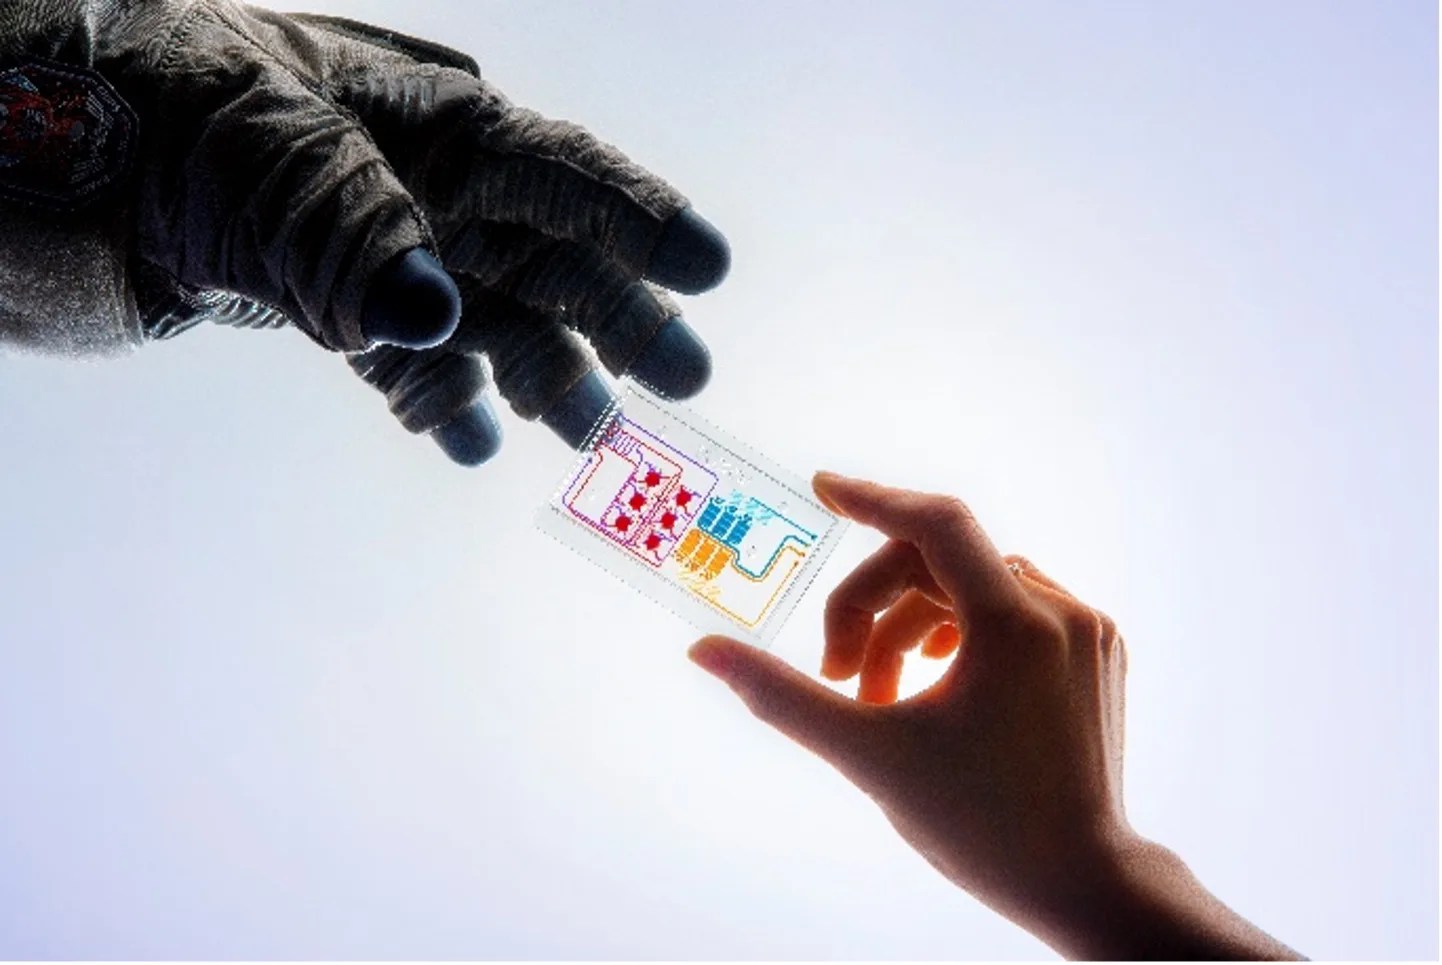 Photograph of a hand holding a colorized chip being handed to a gloved hand.